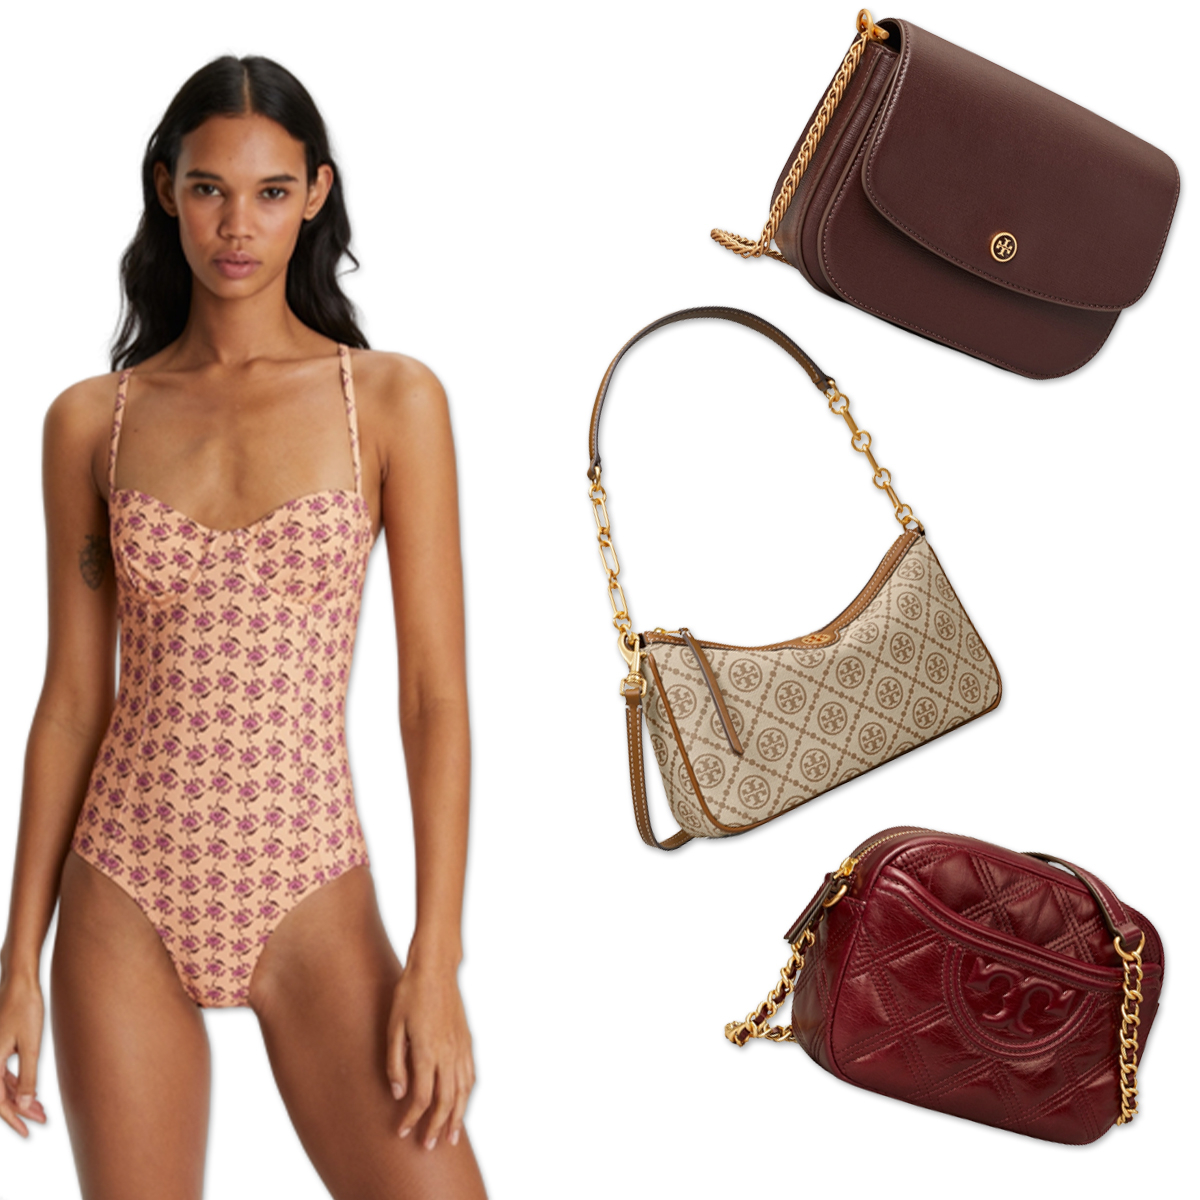 Tory Burch's Summer Sale Has Over 500 Items Up for Grabs